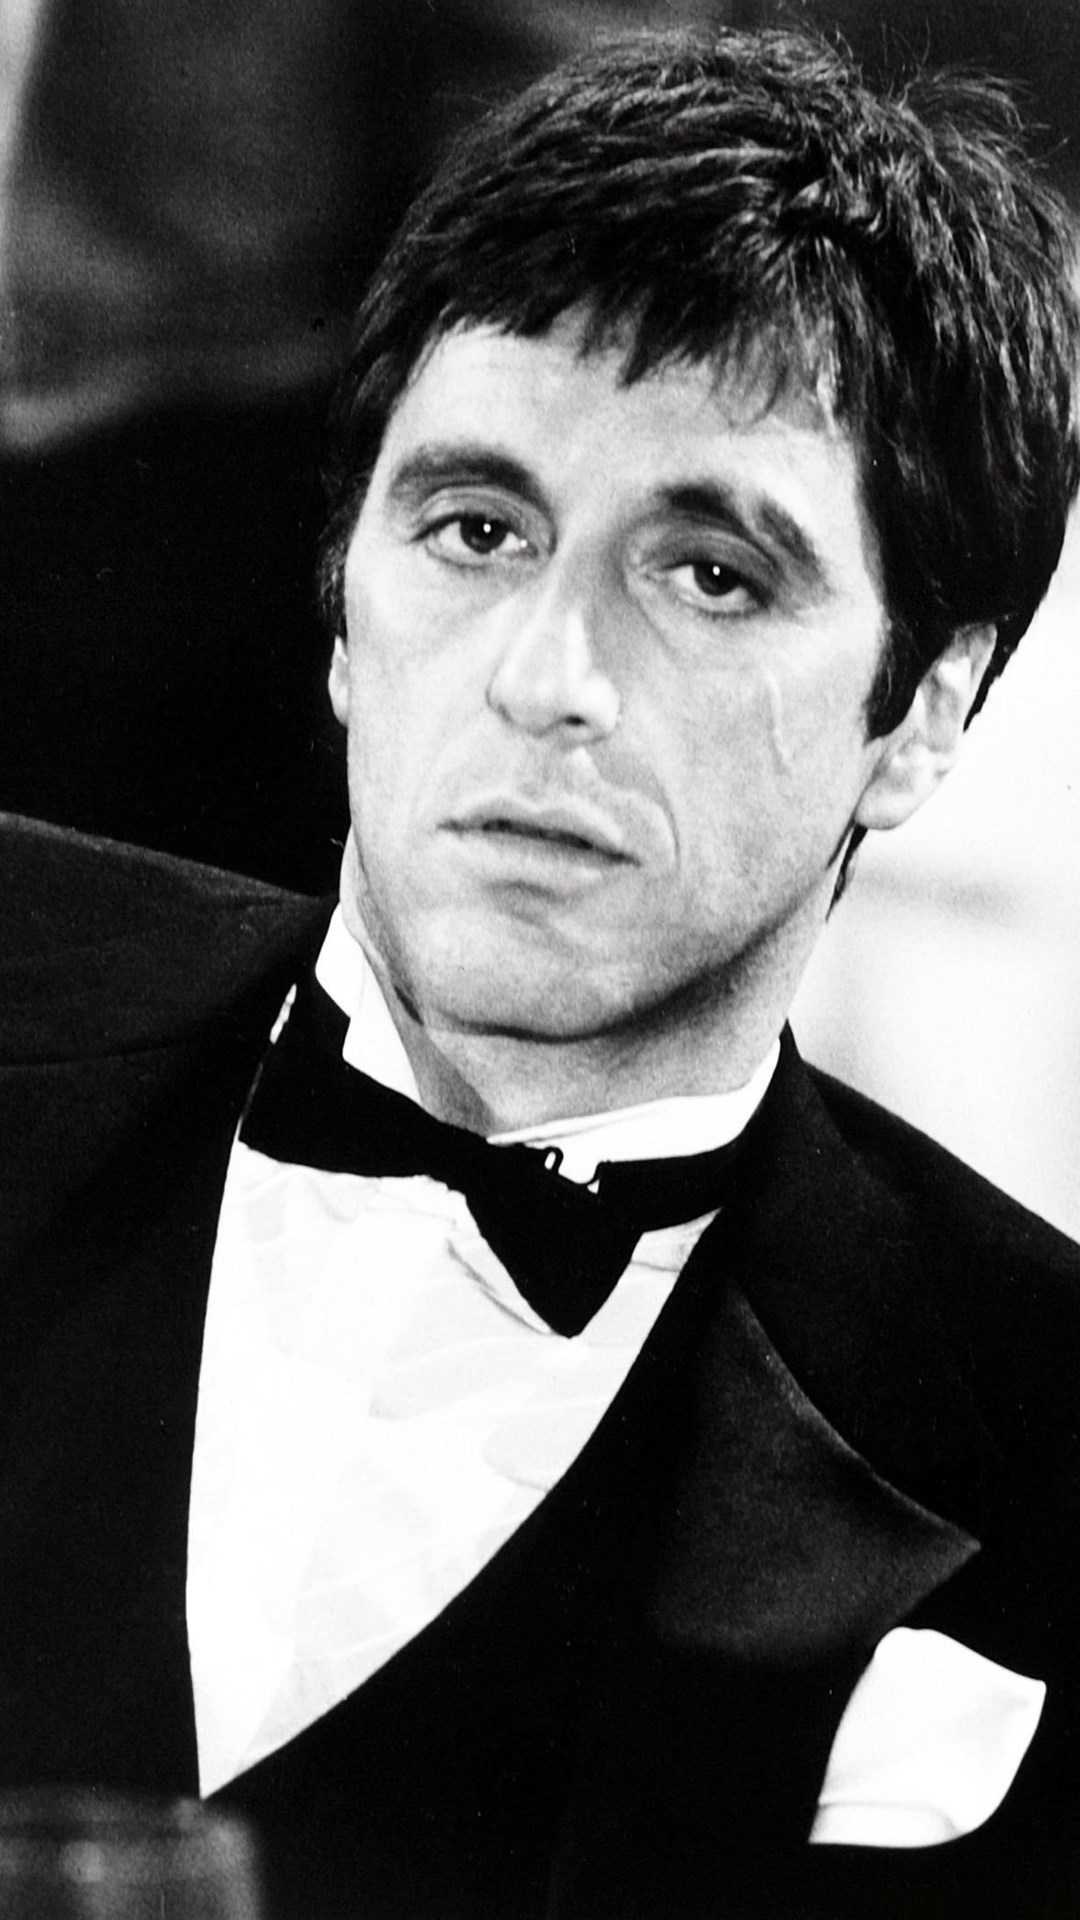 HD wallpaper, 1080X1920 Full Hd Phone, Scarface Movie, Mobile 1080P Scarface Wallpaper, Classic Film, Iconic Poster